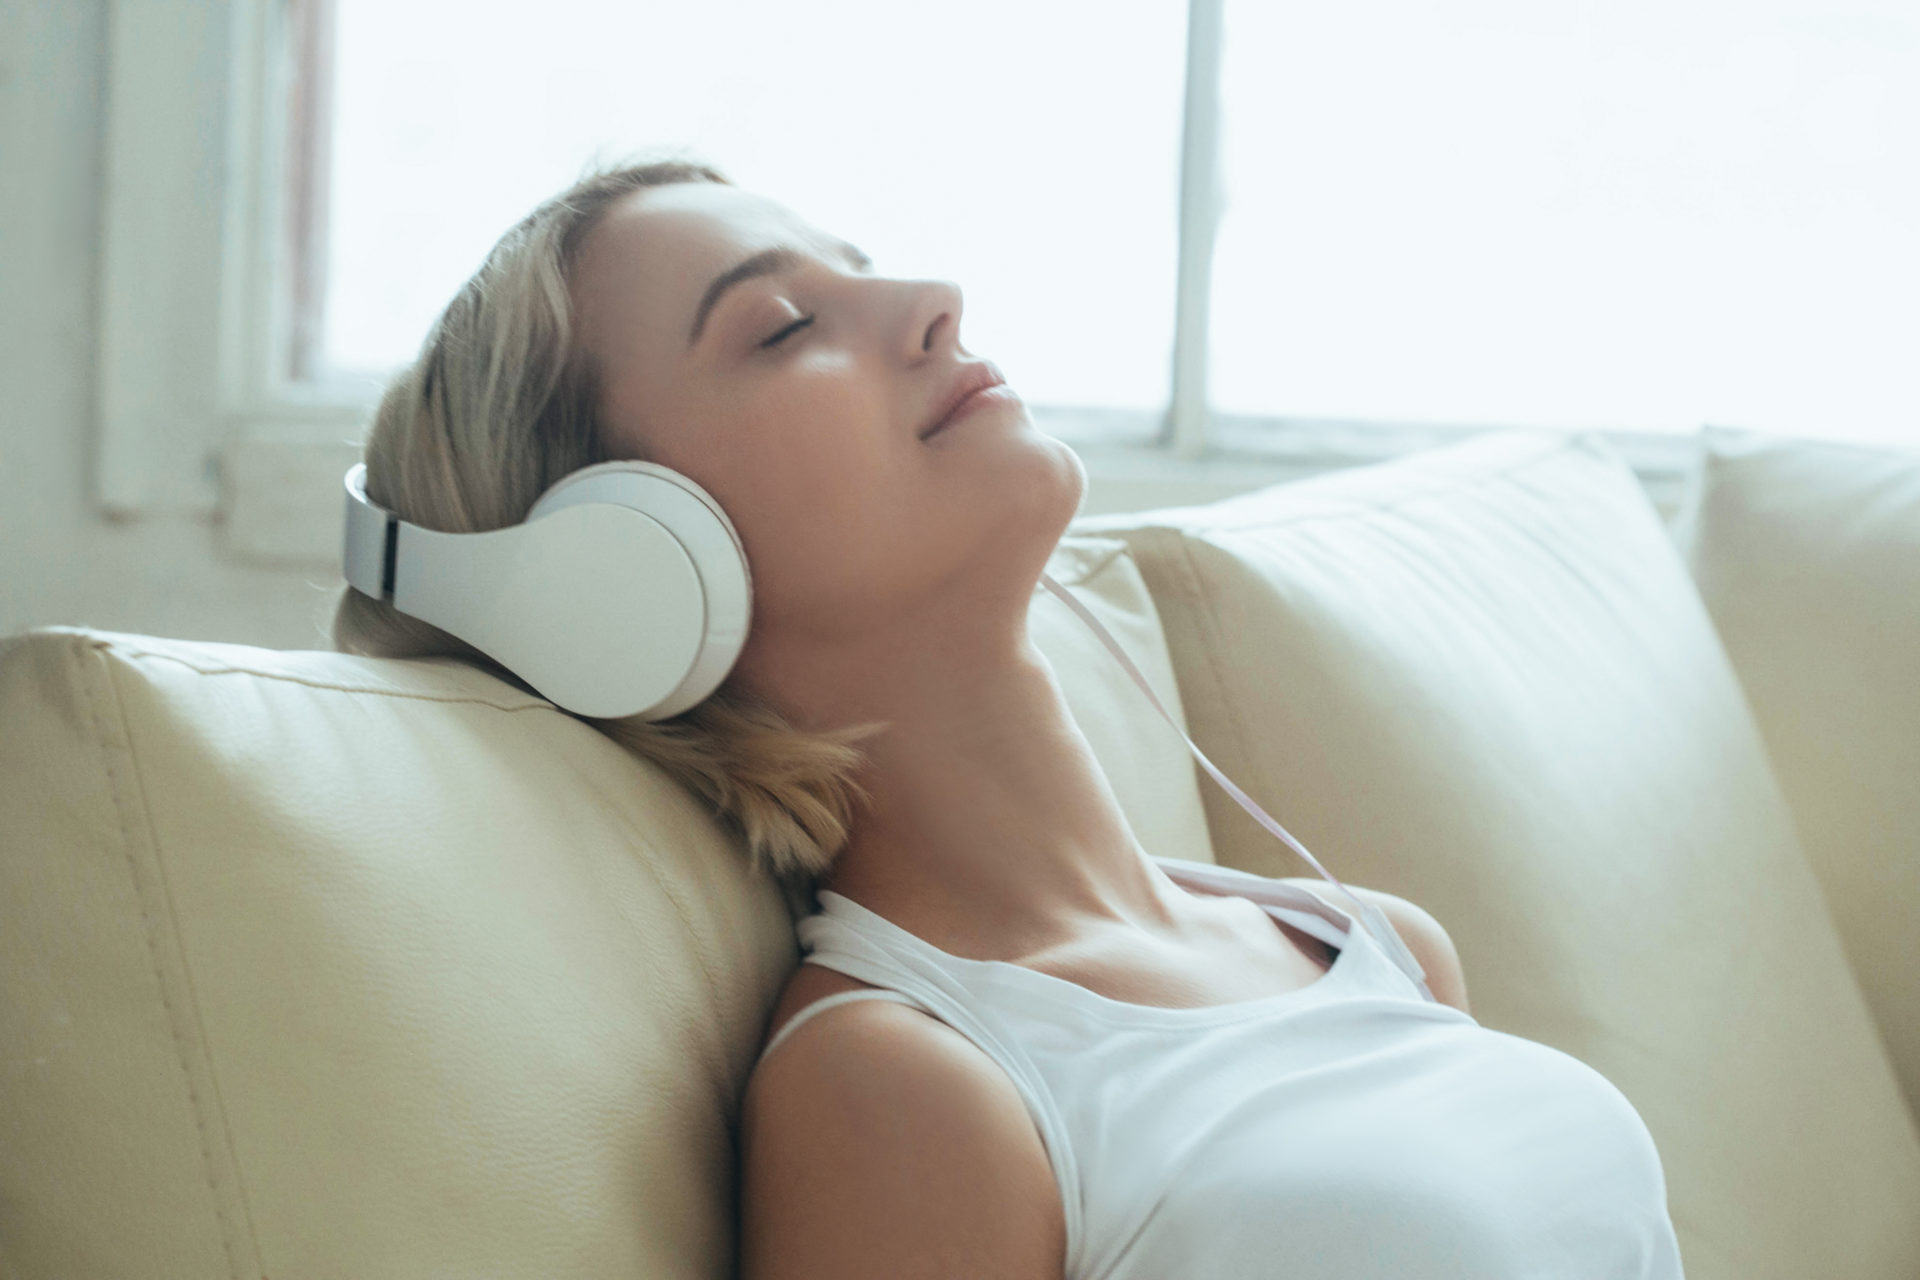 Woman,In,Headphones,At,Home,Listening,To,Music,,Relax,Alone